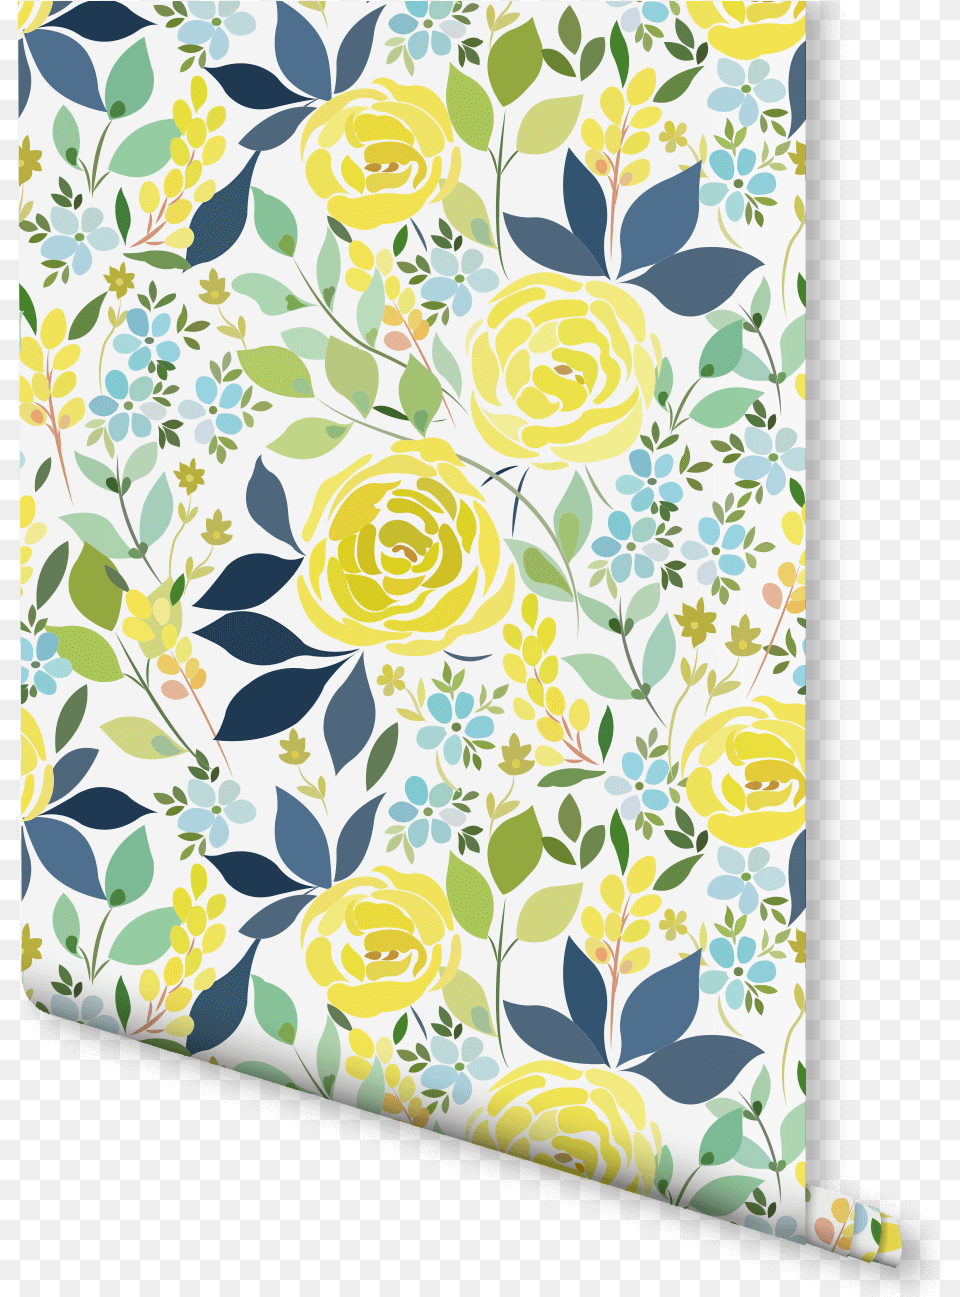 Inject A Bit Of Zest Into Your Home With This Floral Yellow And Turquoise Floral, Flower, Plant, Rose, Home Decor Png Image